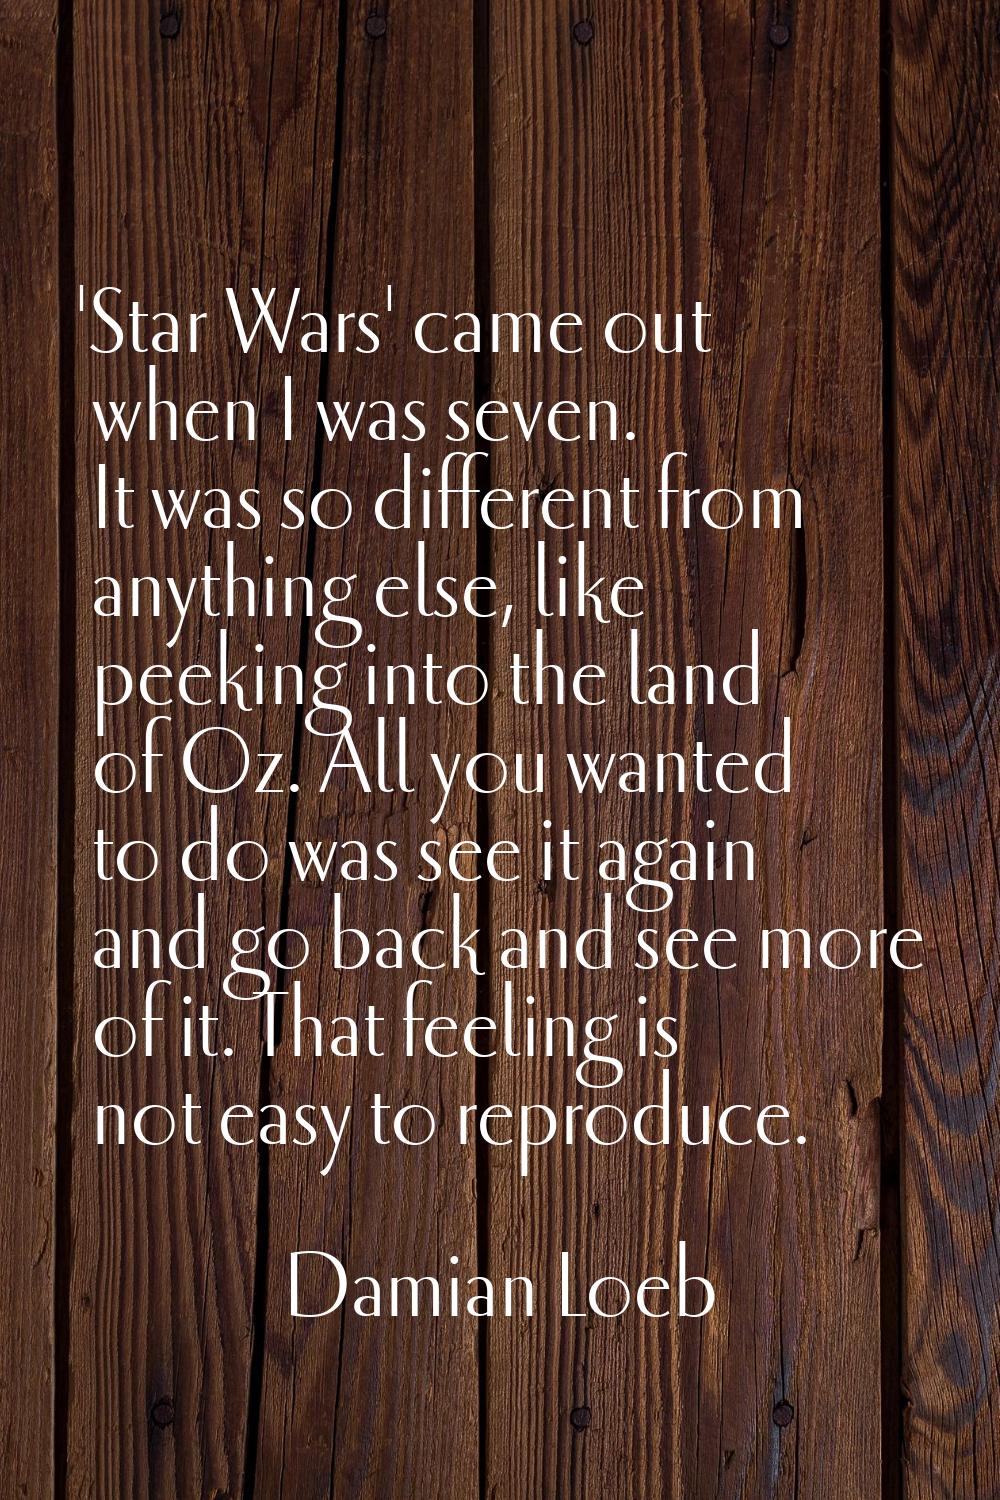 'Star Wars' came out when I was seven. It was so different from anything else, like peeking into th